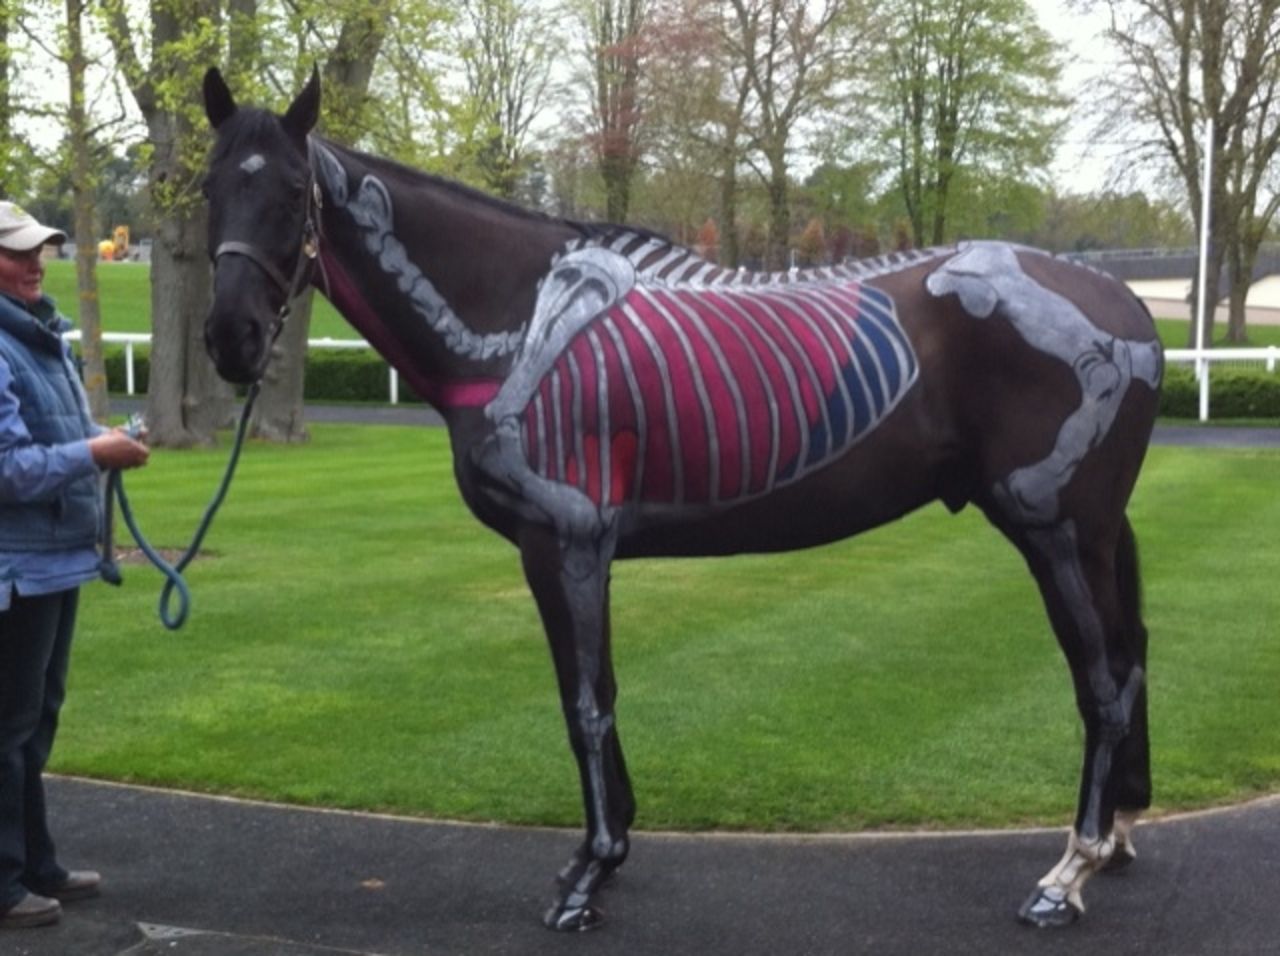 The carefully painted horses are displayed at races and equine teaching events across Britain, such as this horse by massage therapist Nicole Rossa.